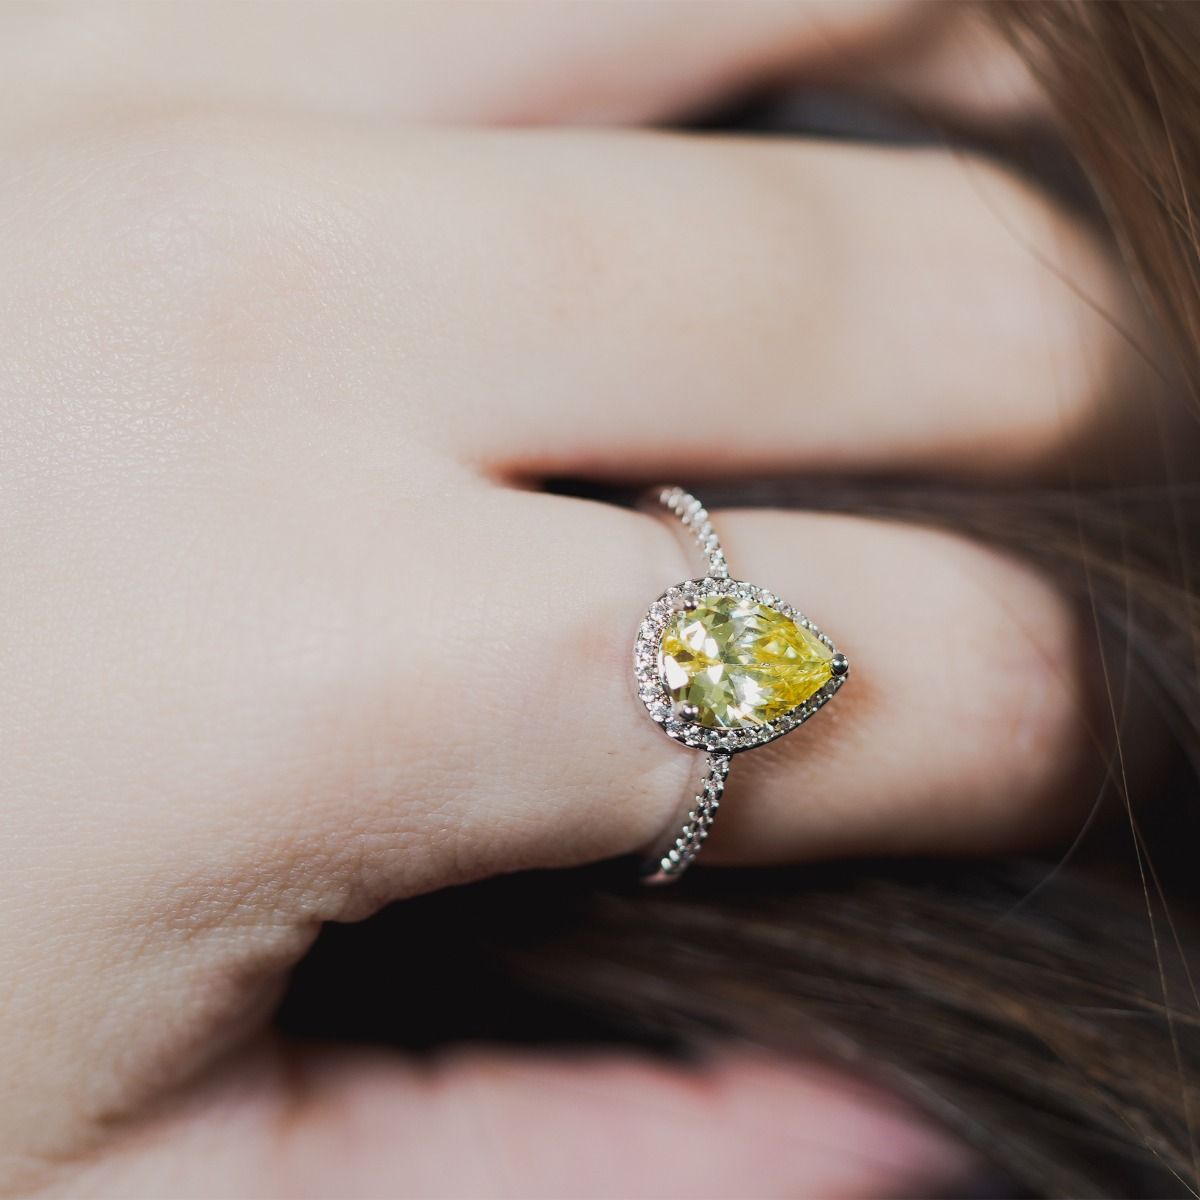 This beautiful ring features a dazzling pear cut canary centre stone set with a surround of flawlessly cut cubic zirconia stones. Wear to add timeless glamour to any look. 